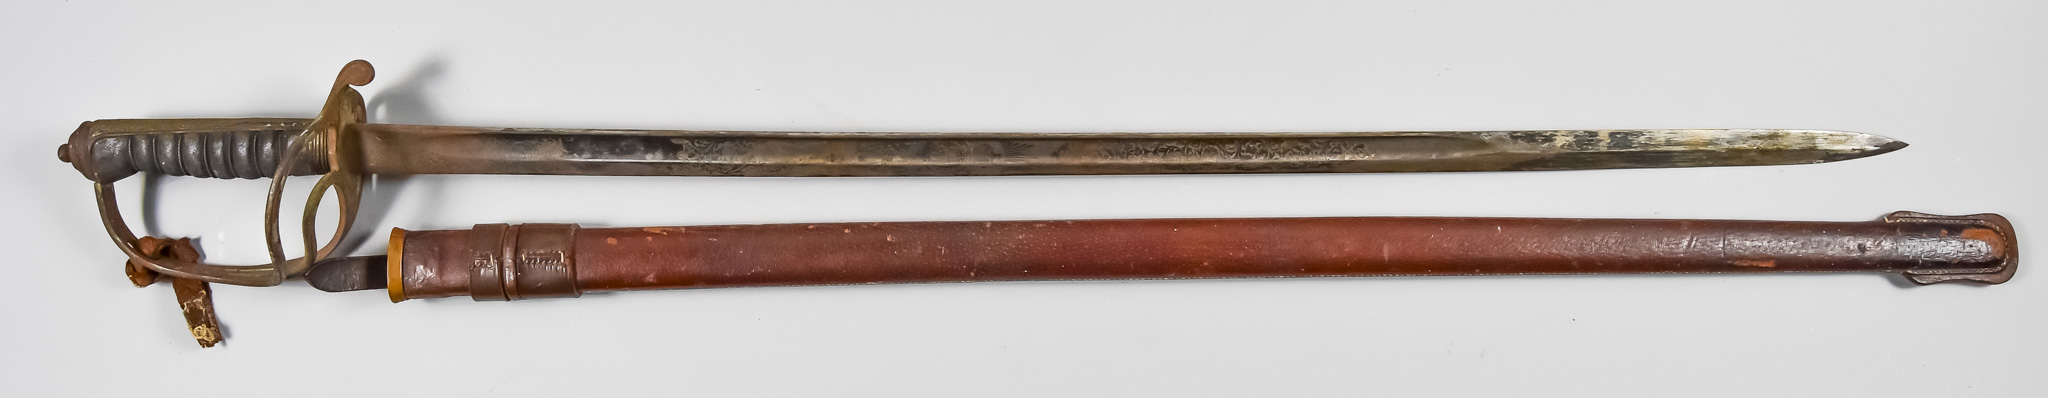 An Officer's Sword, Royal Artillery, by Henry Wilkinson of London, serial no. 56640, 34ins bright